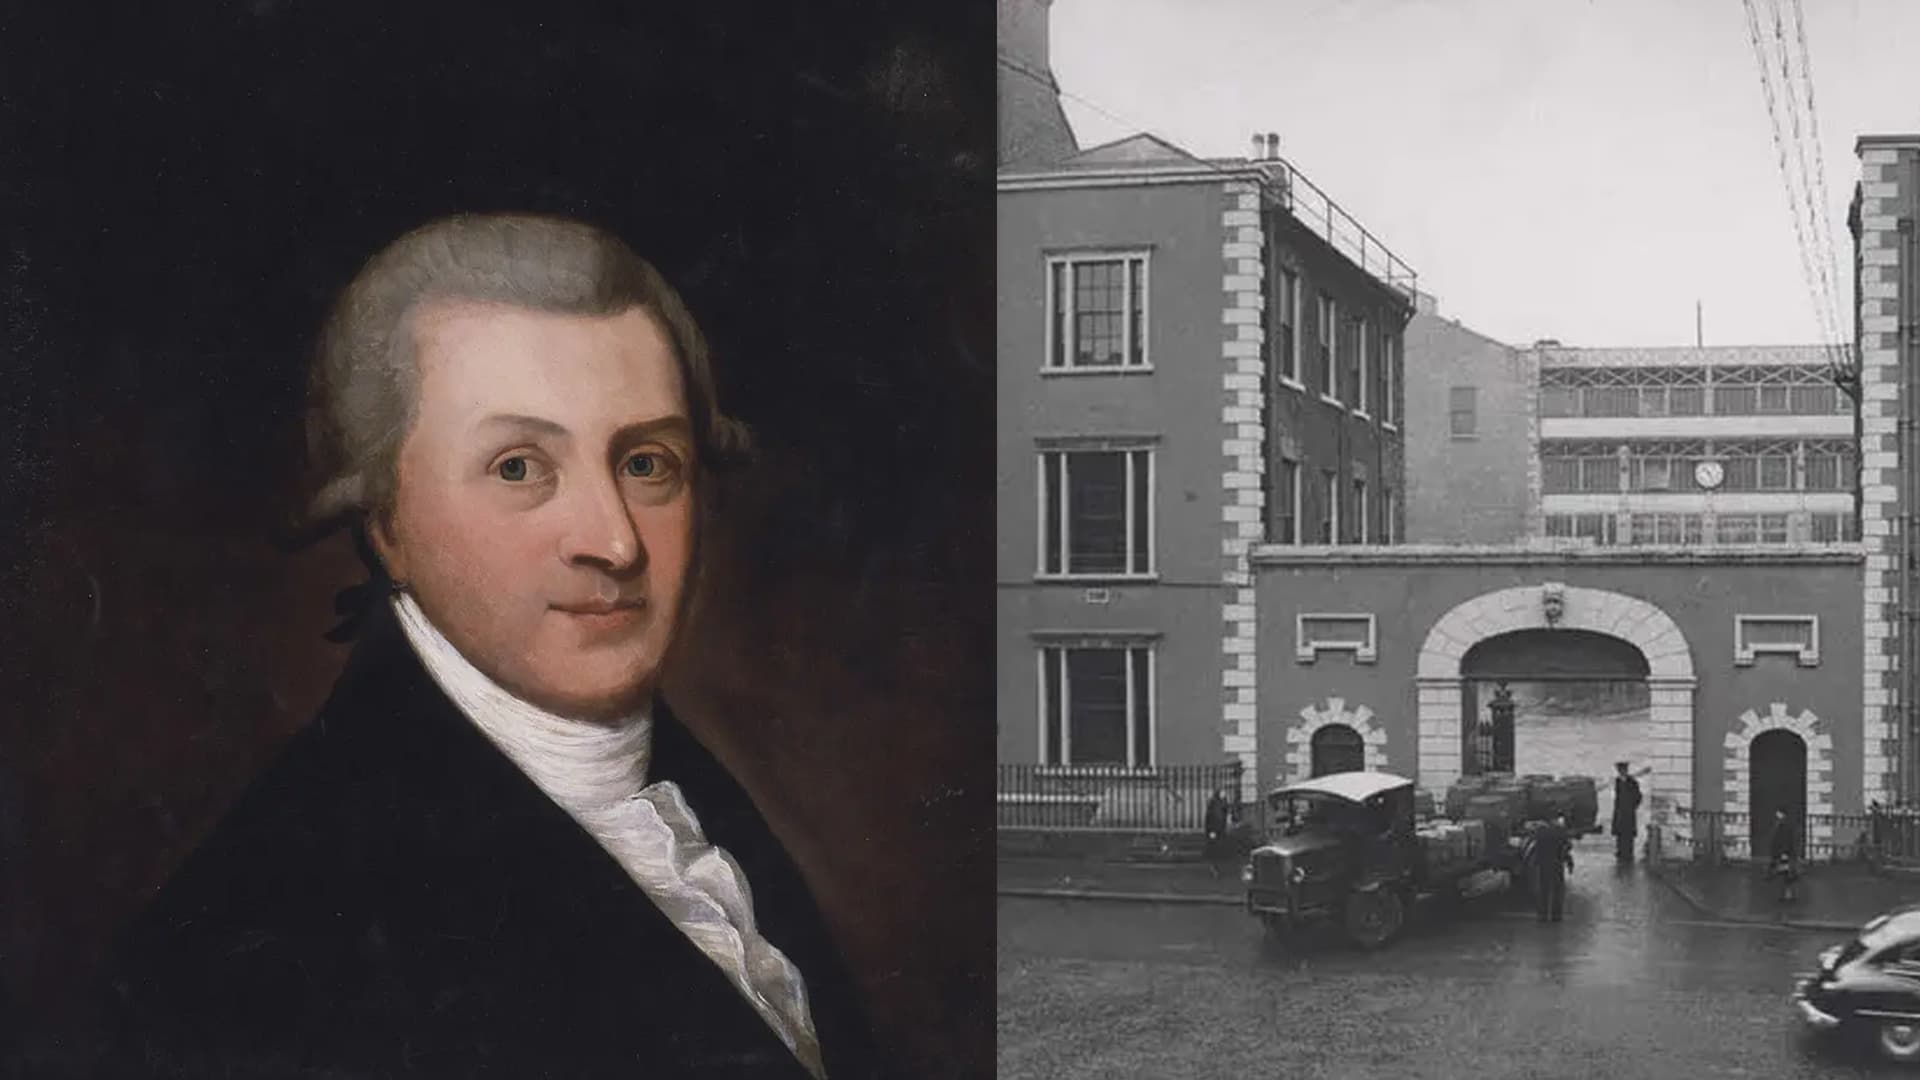 Historic portrait of brand founder, Arthur Guinness and Historic black and white photo of the Guinness storehouse